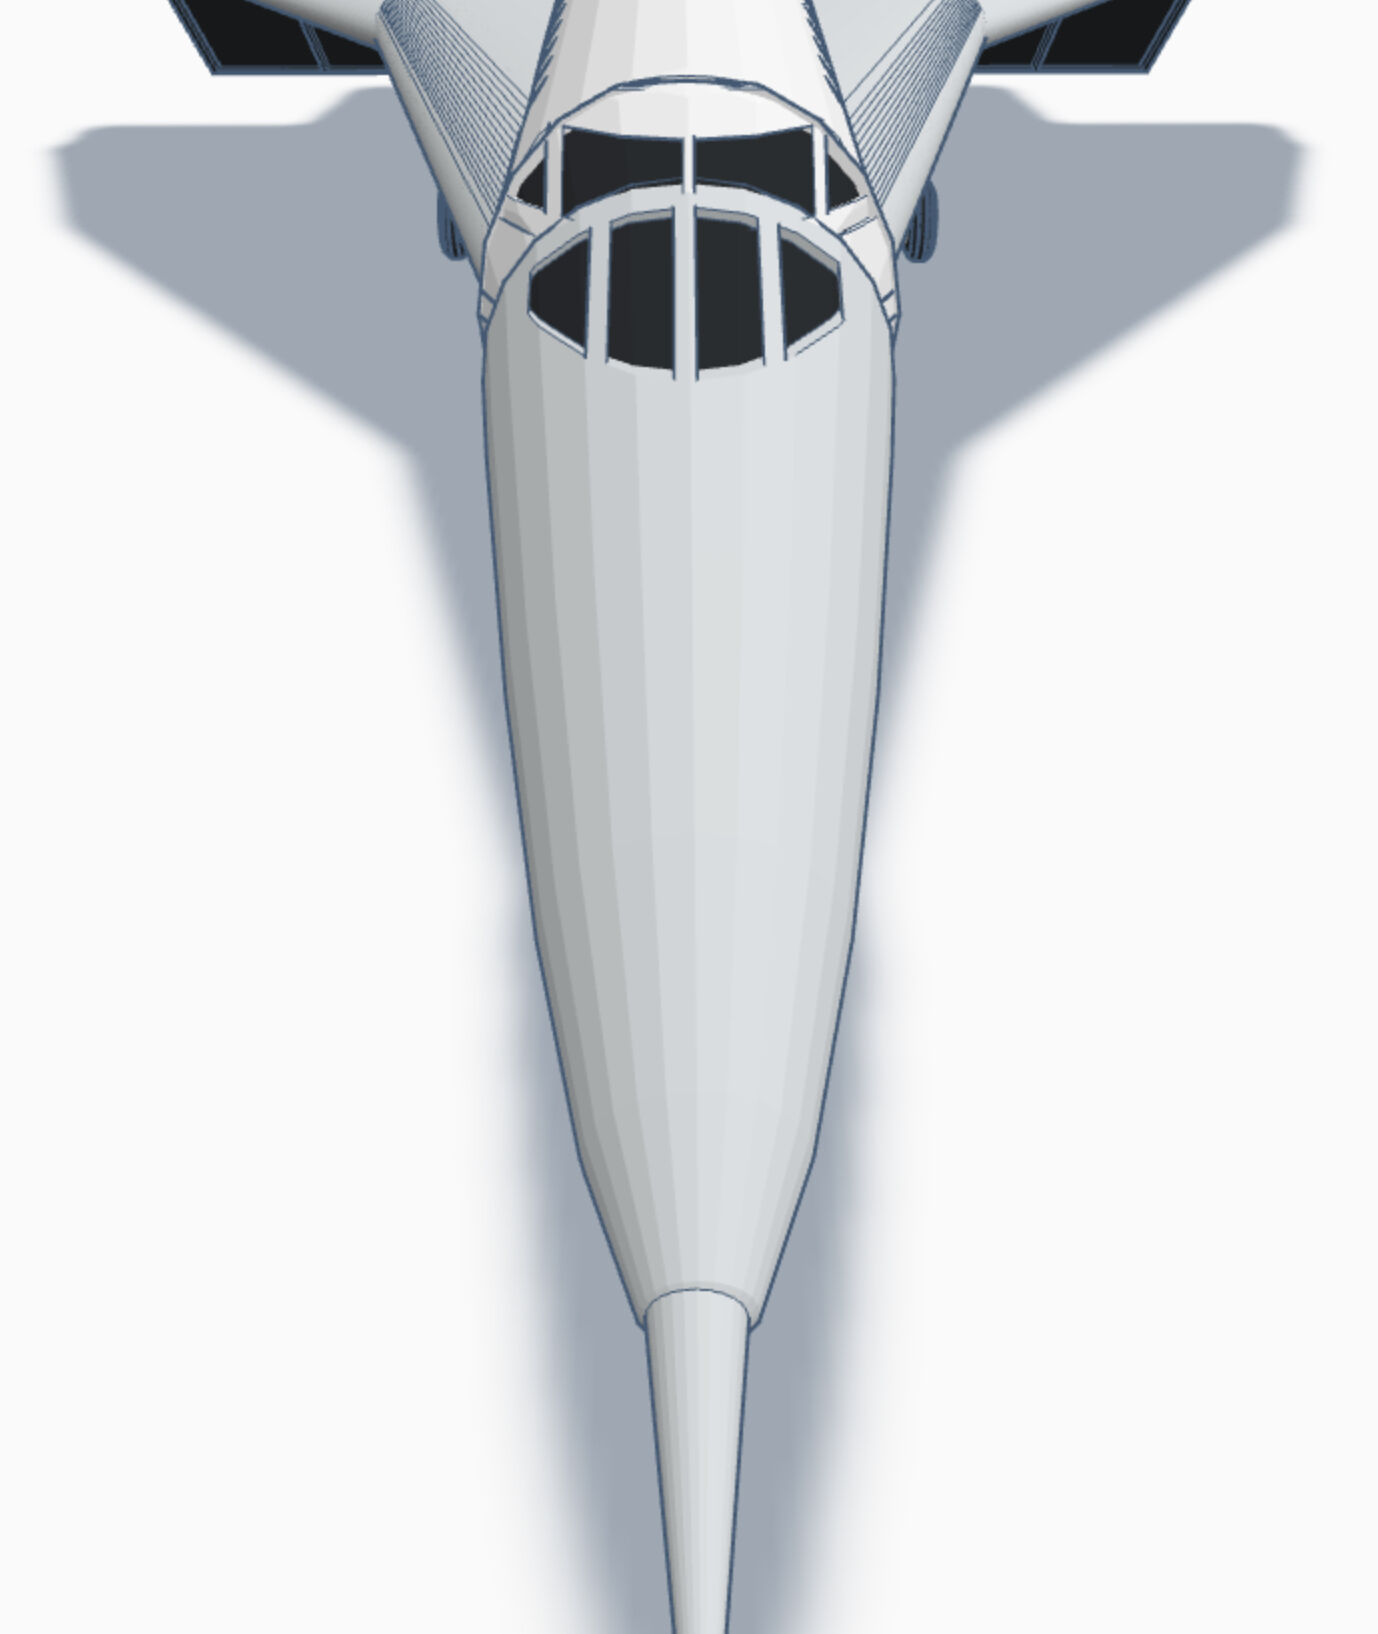 Concorde *Supersonic Airliner*